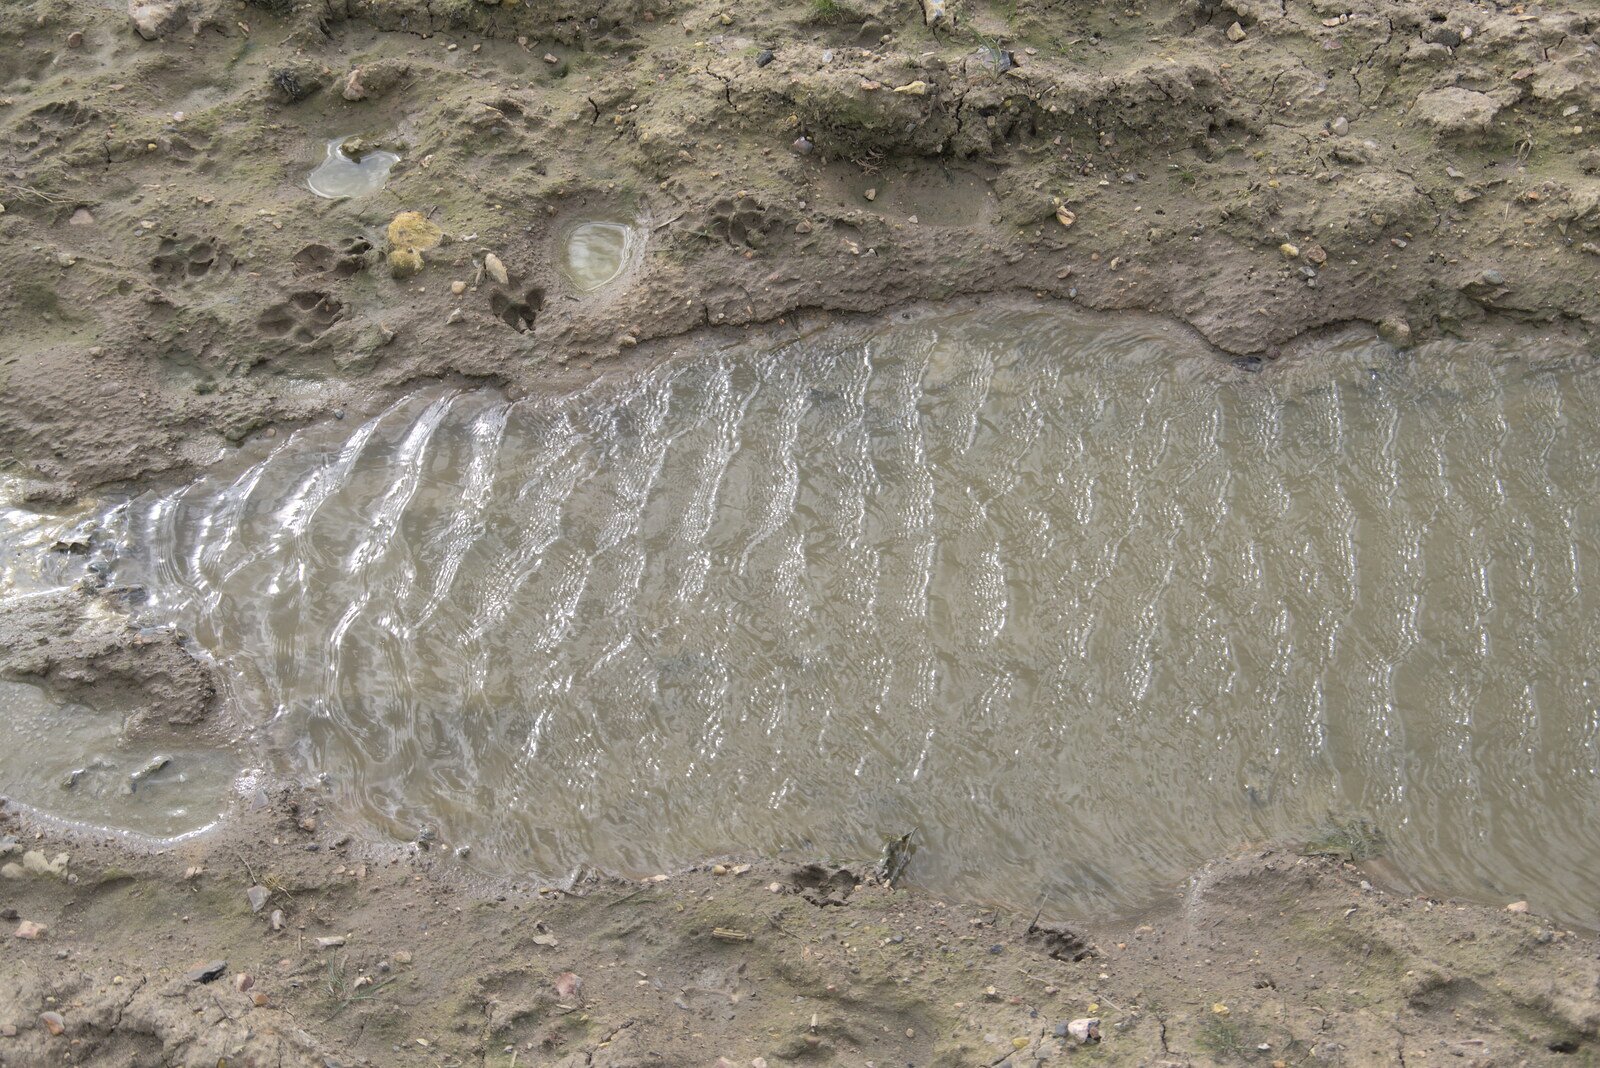 A puddle demonstrates perfectly how waves form from Another Walk on Eye Airfield, Eye, Suffolk - 14th March 2021